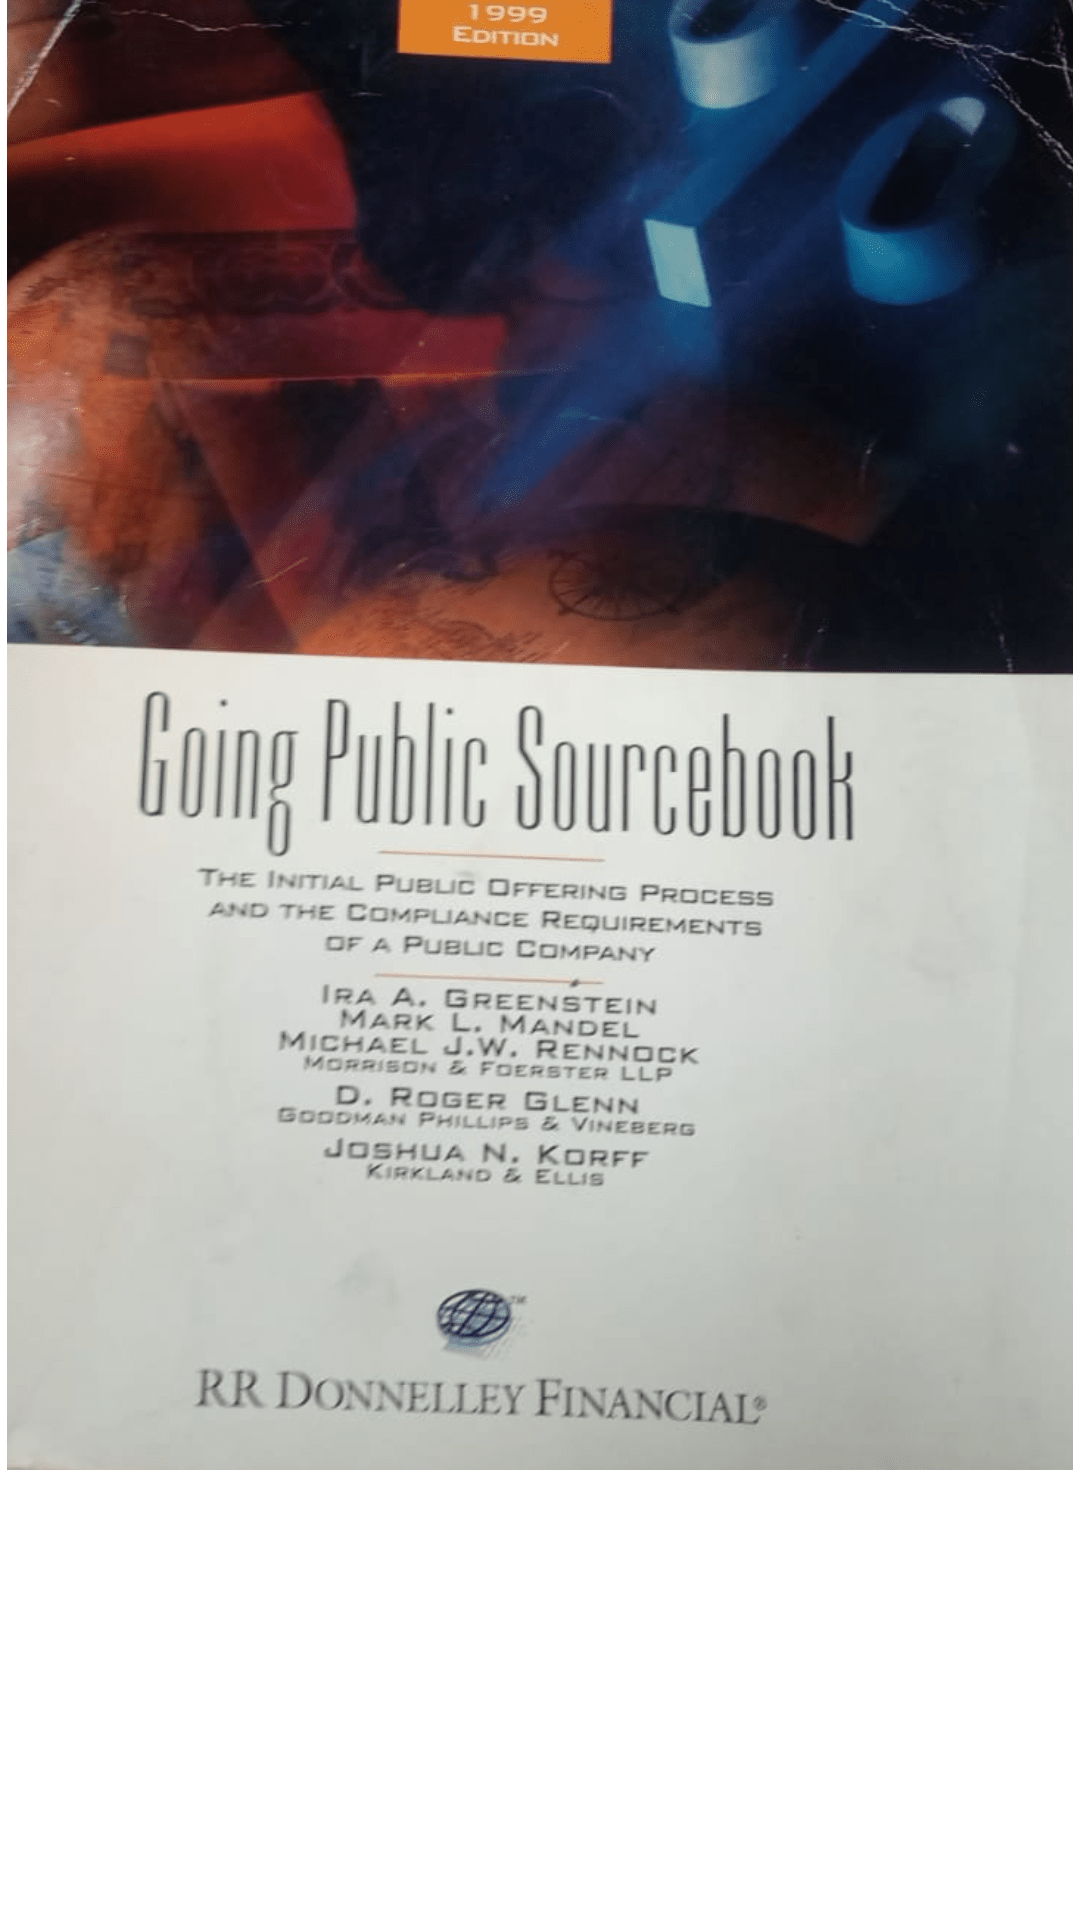 Going Public Sourcebook: The Initial Public Offering Process and the Compliance Requirements of a Public Company